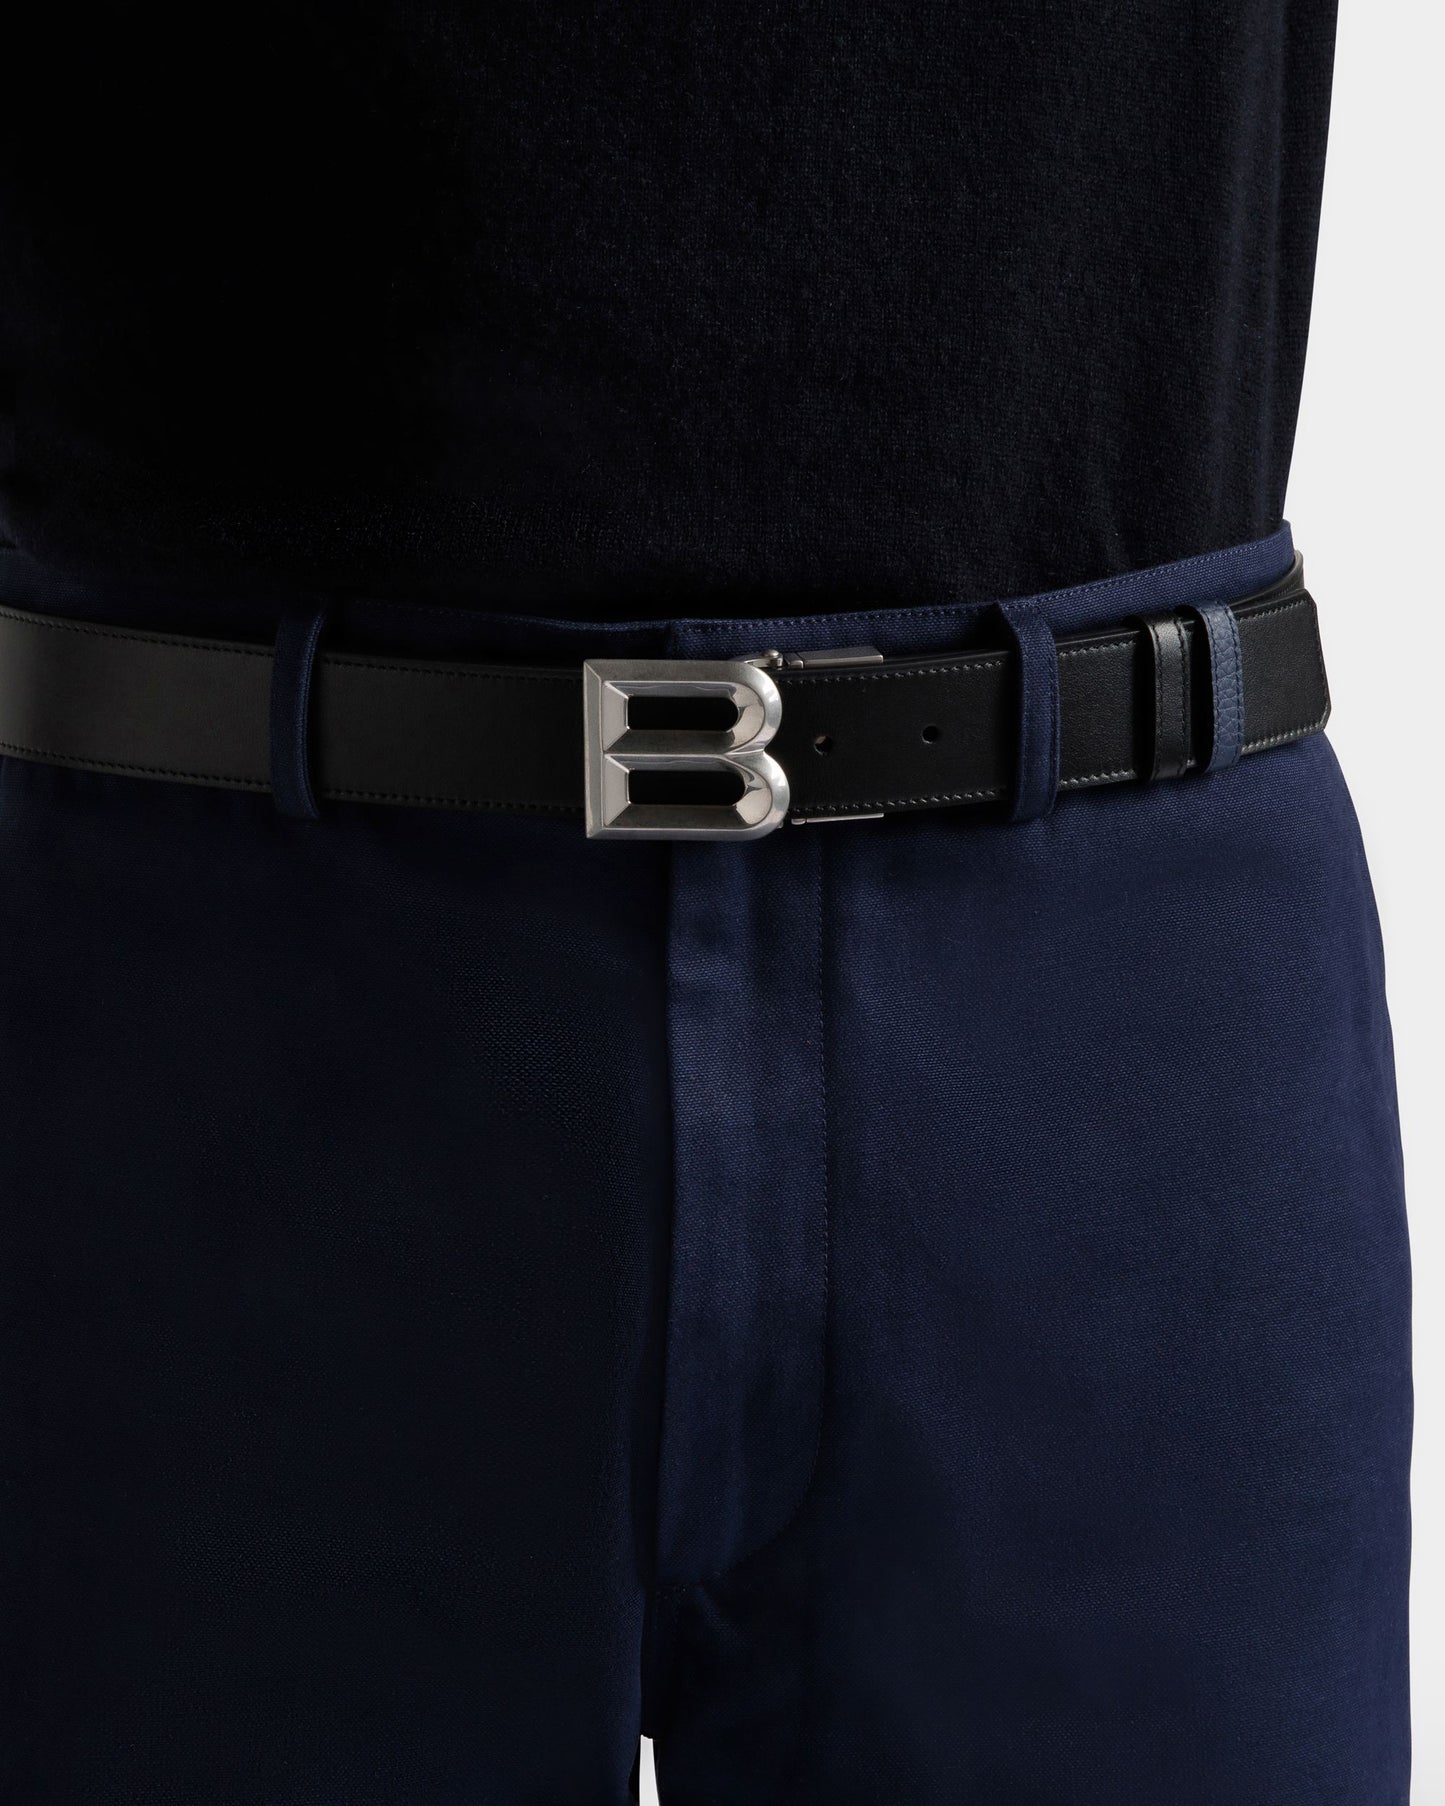 B Bold 35mm | Men's Reversible And Adjustable Belt in Black And Marine ...